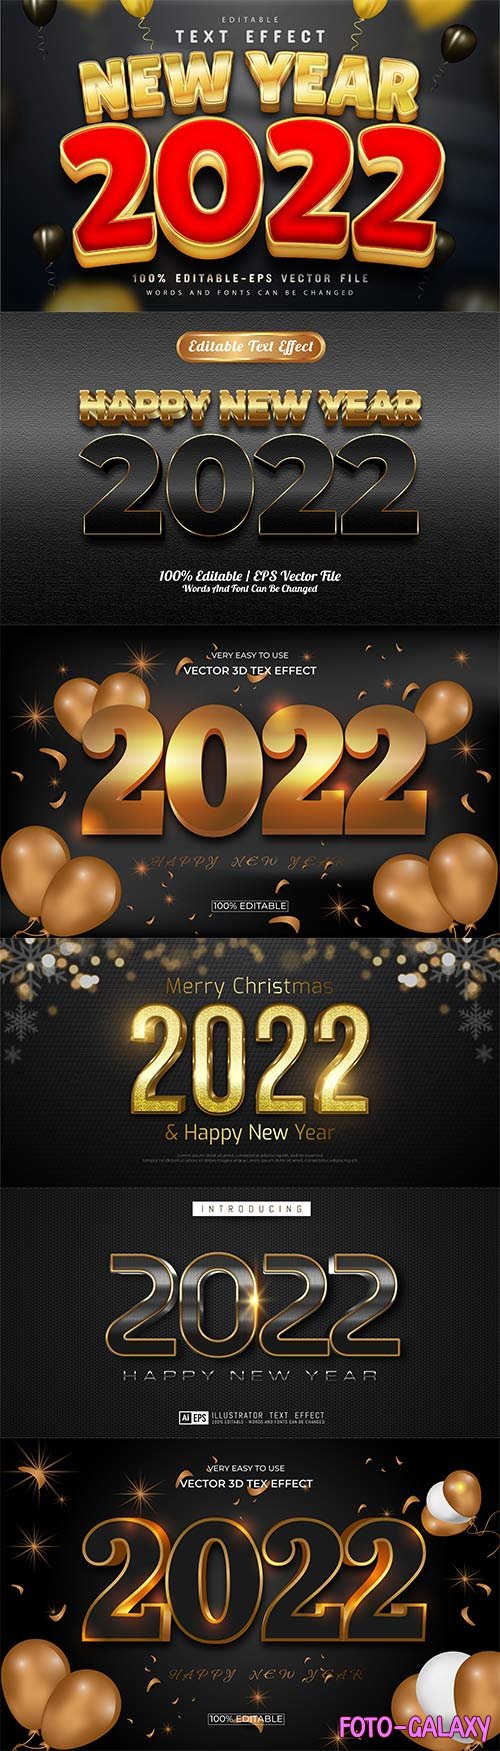 Merry christmas and happy new year 2022 editable vector text effects vol 4